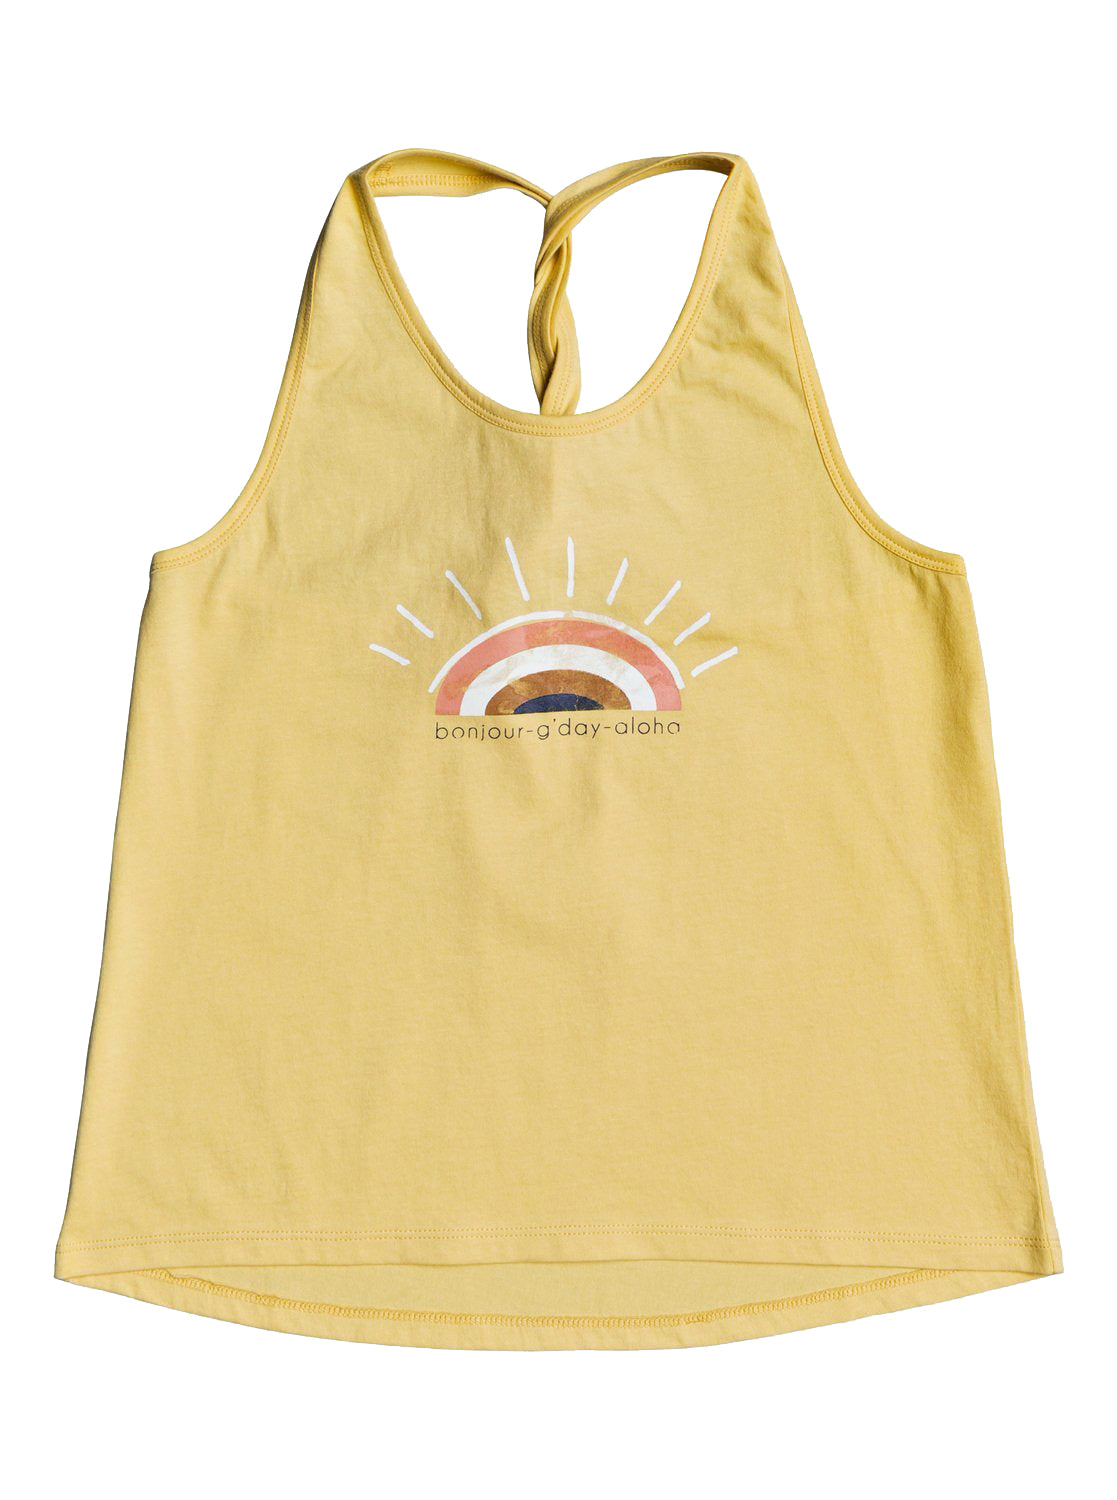 Roxy Wish You The Best Girls Tank Top YGD0 8/S